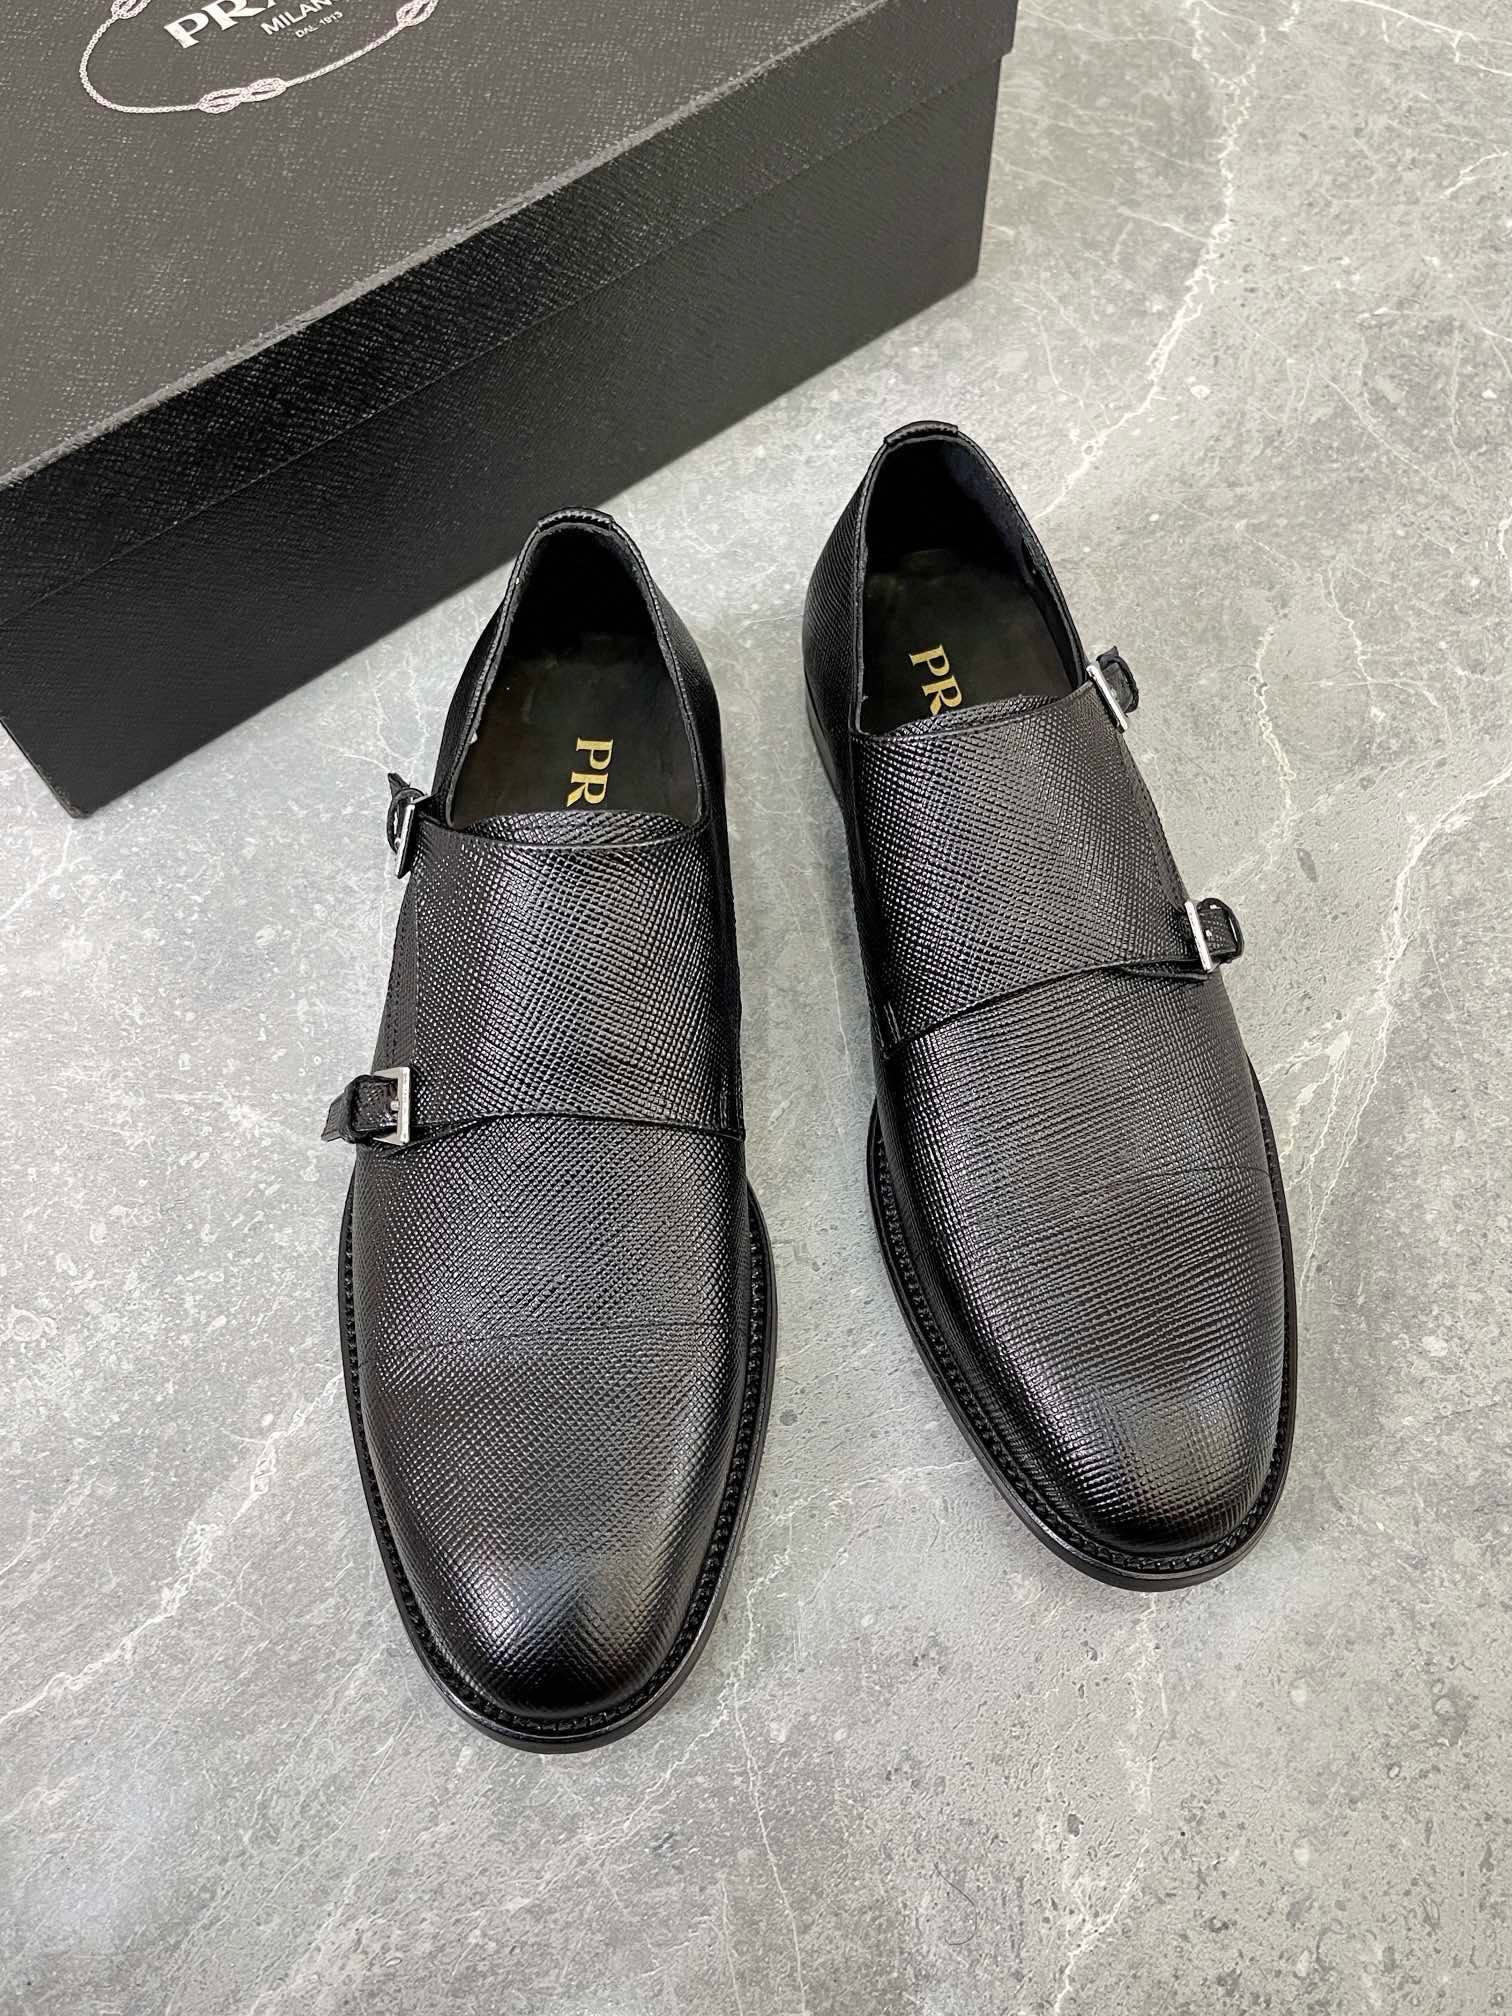 Prada Shoes Loafers Men Calfskin Cowhide Genuine Leather Rubber